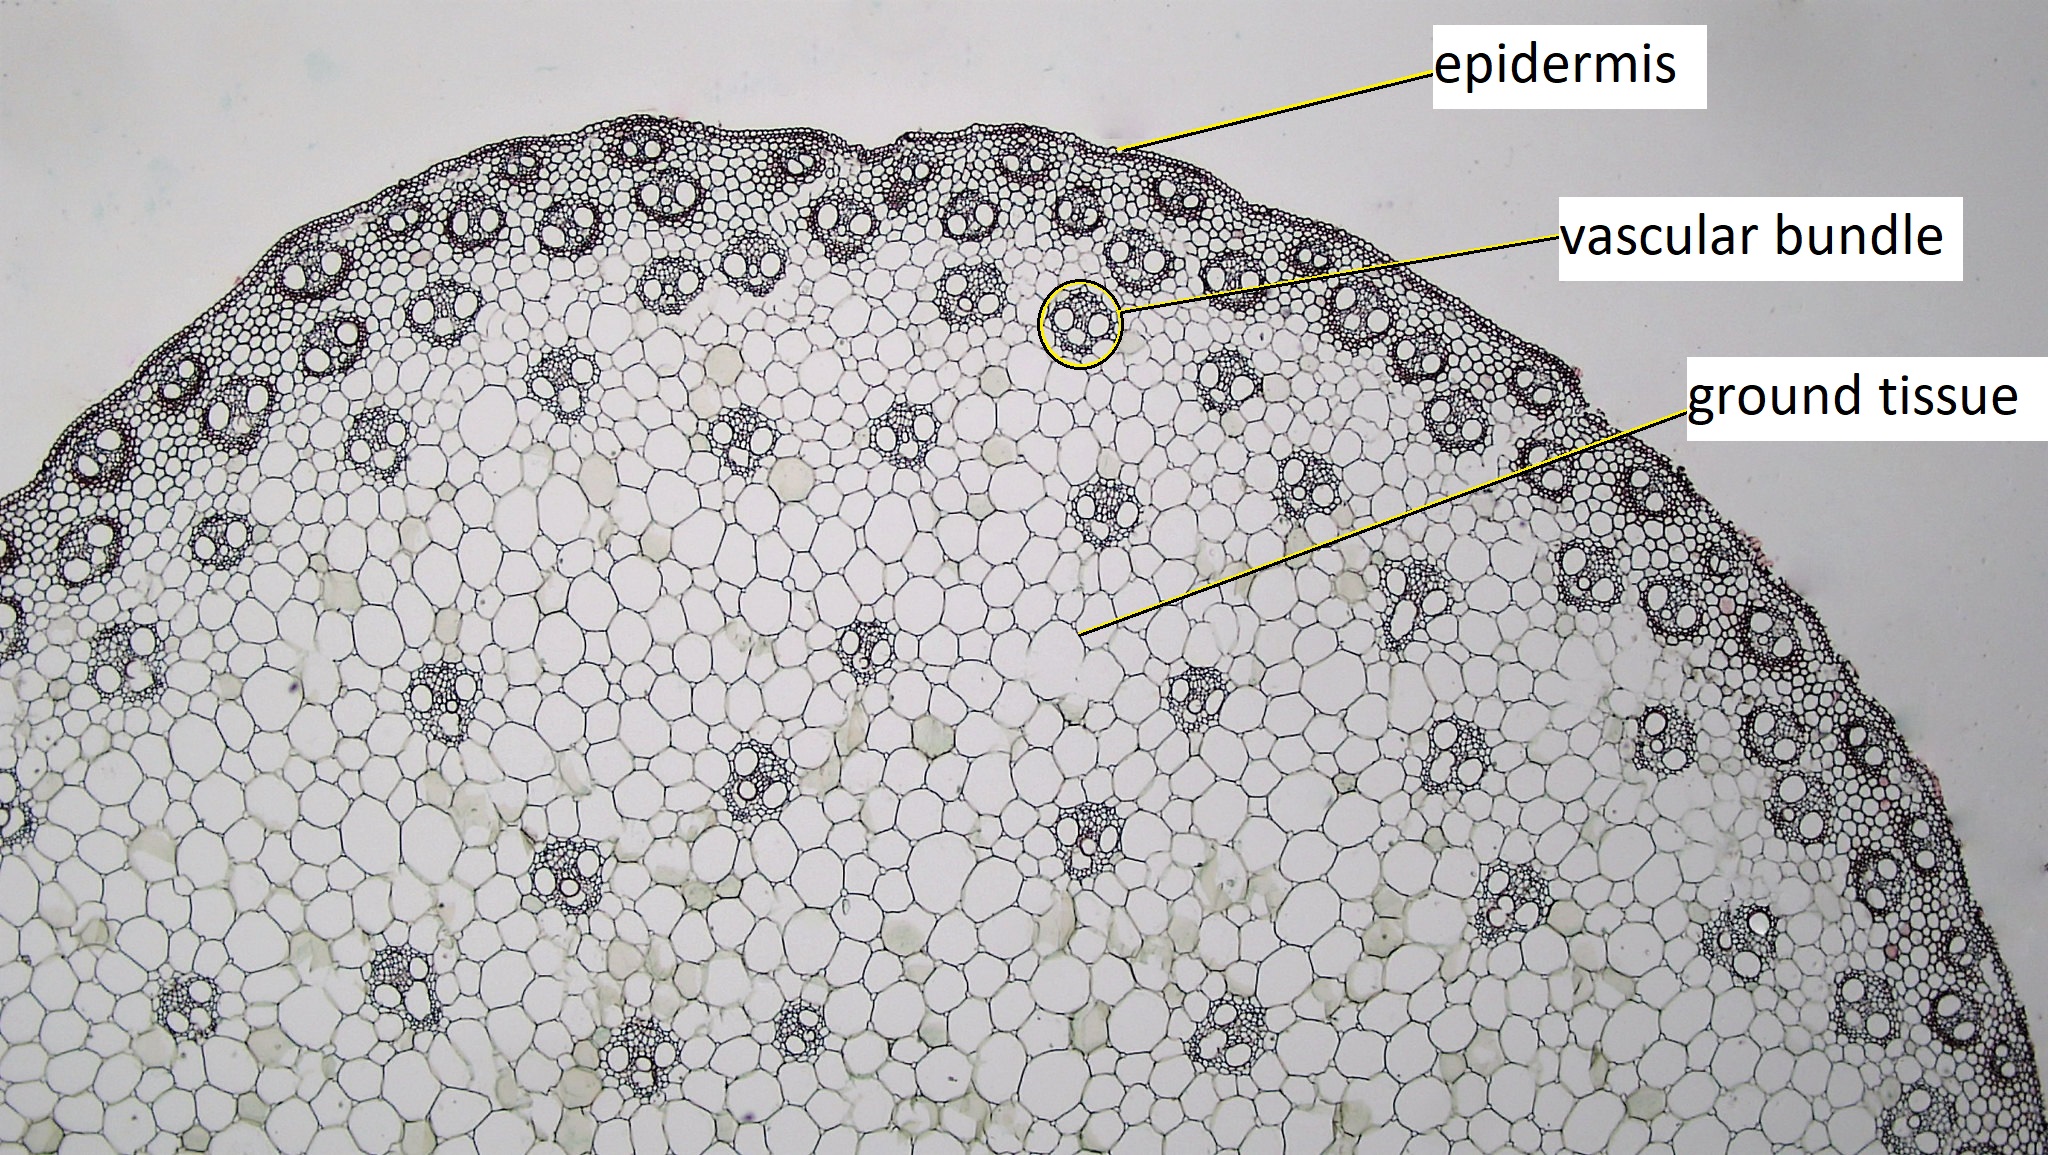 A cross section of a corn stem, showing scattered vascular bundles